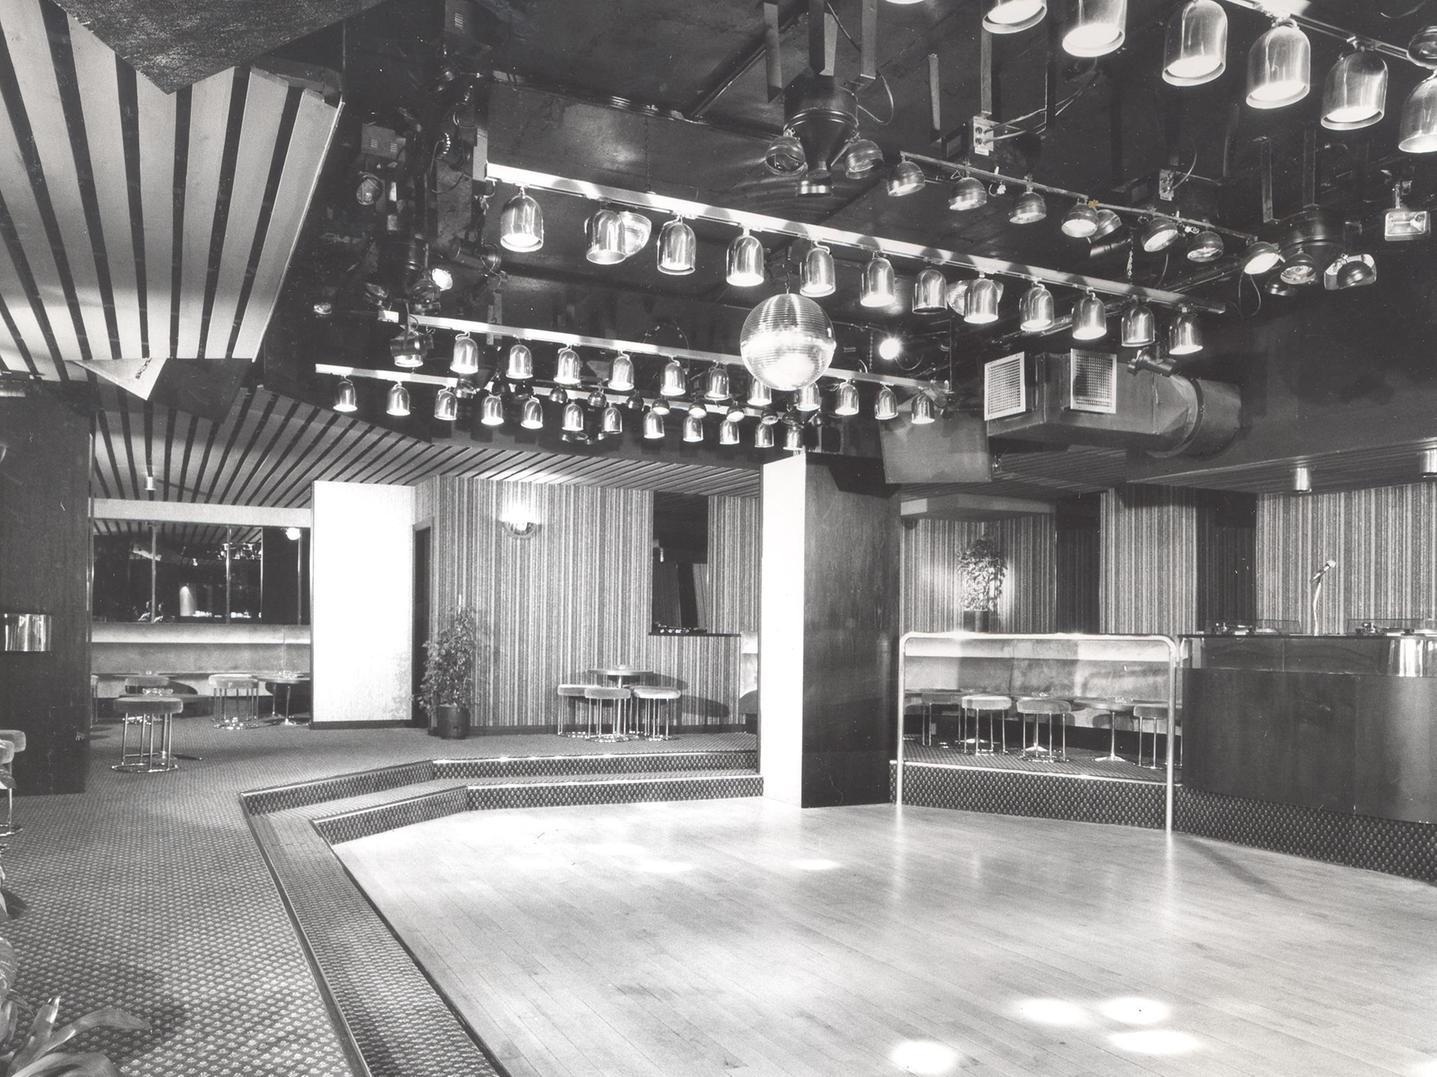 This is the dancefloor at the Madison in Leeds city centre back in July 1983. Did you enjoy a boogie here?